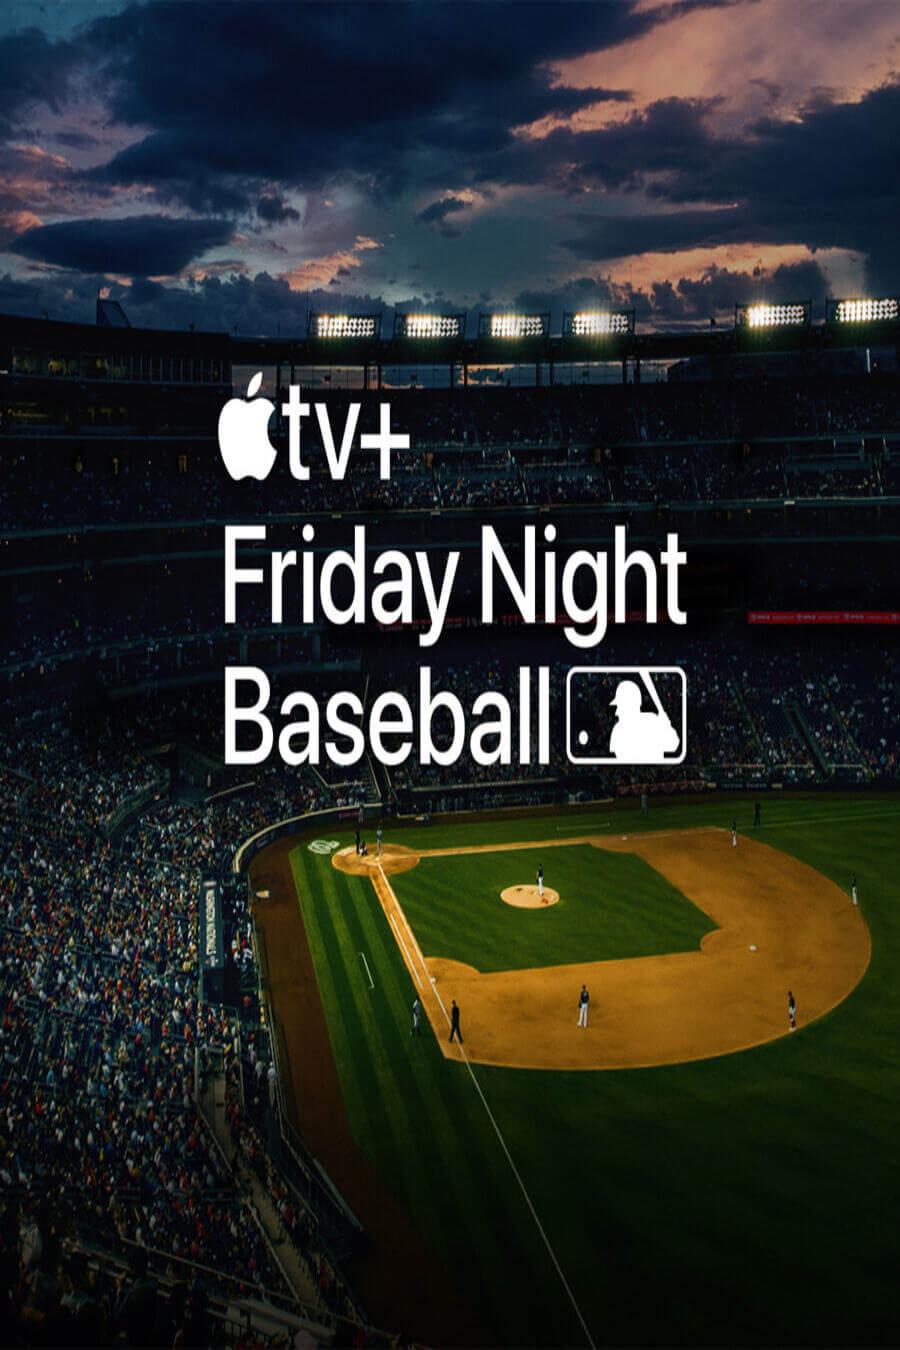 TV ratings for Friday Night Baseball in Alemania. Apple TV+ TV series